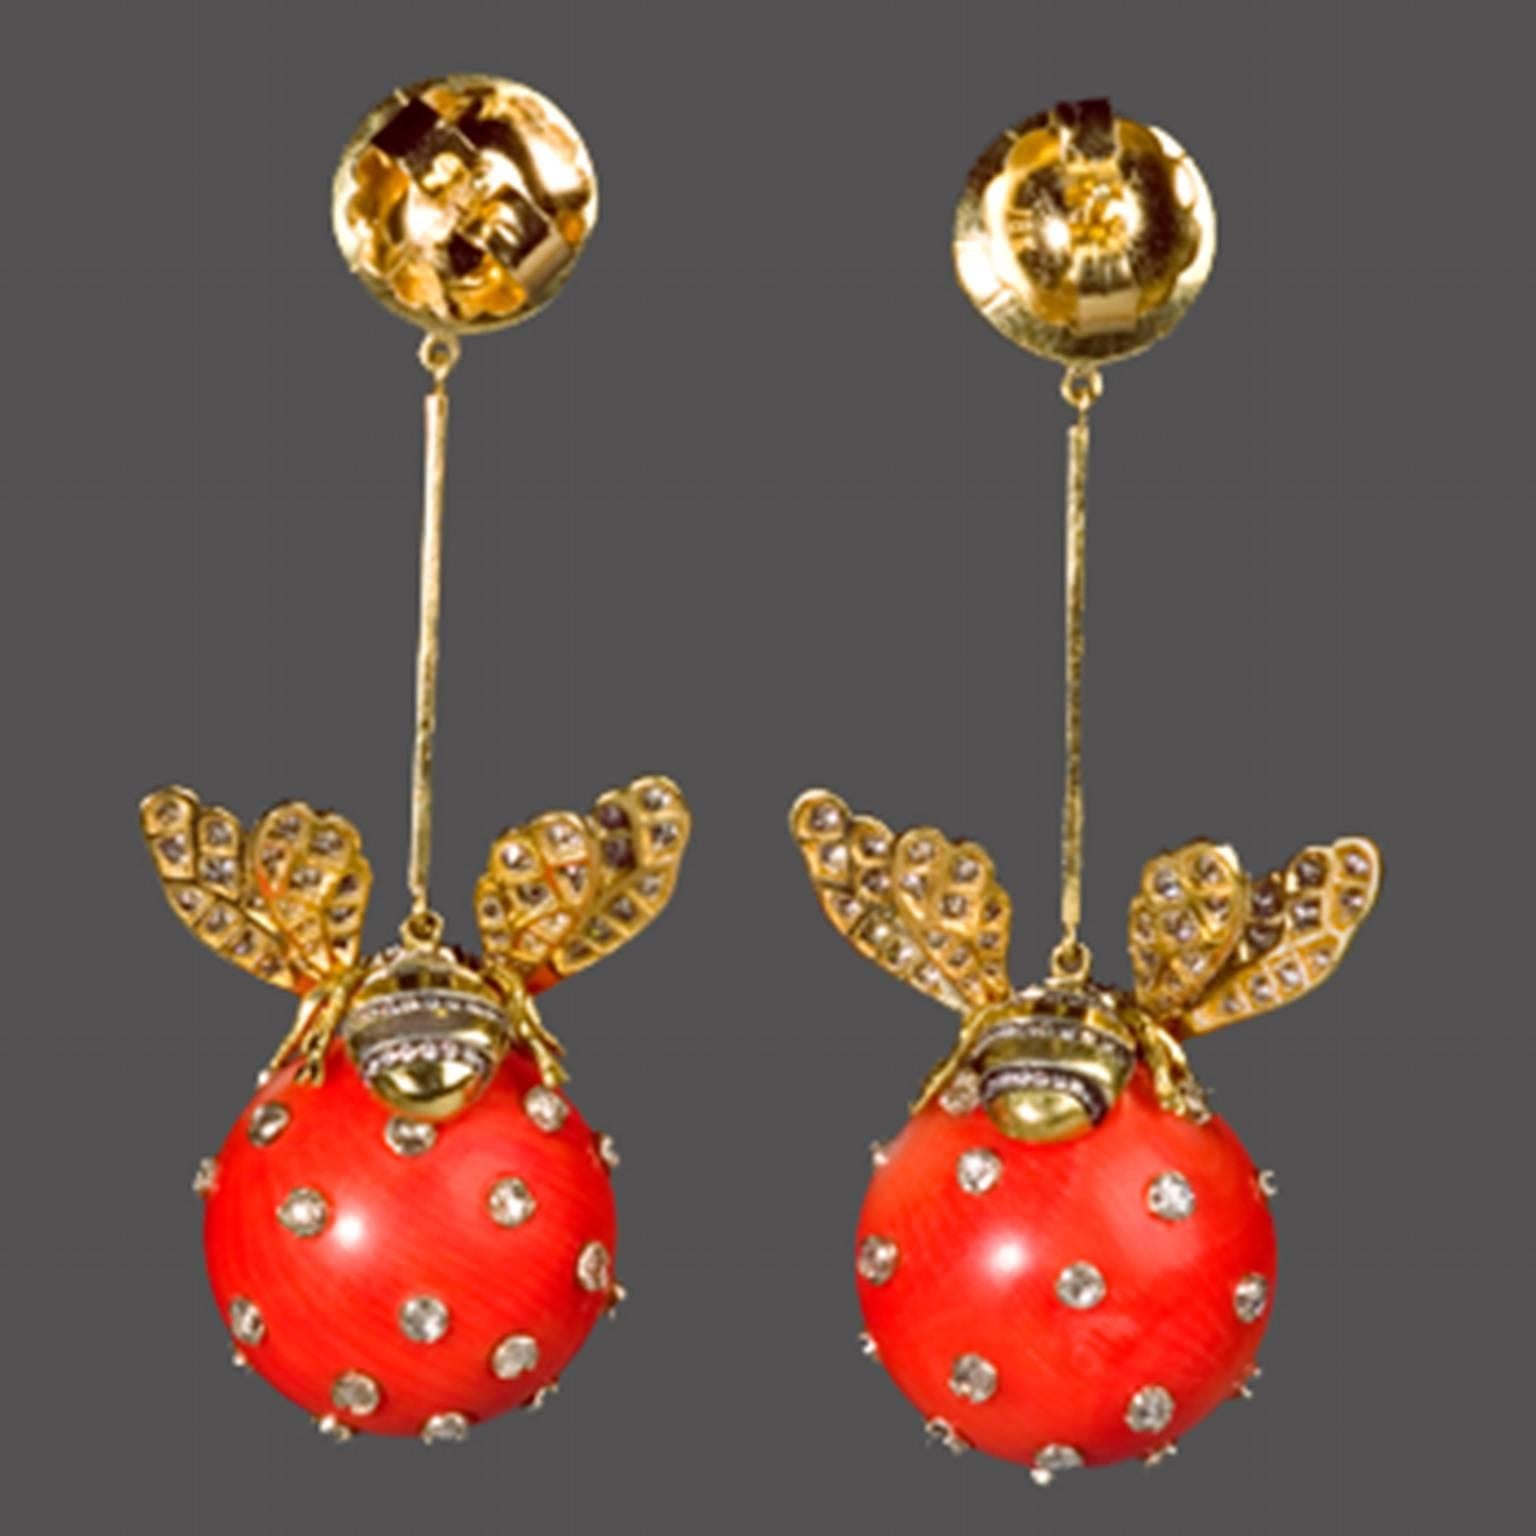 These elegant drop earrings are very light weight for their size and comfortable to  wear. The18k Gold and silver bees set with diamonds and sit on the coral balls set with diamonds. Suspended from a coral stud and an 18k. gold backed sterling